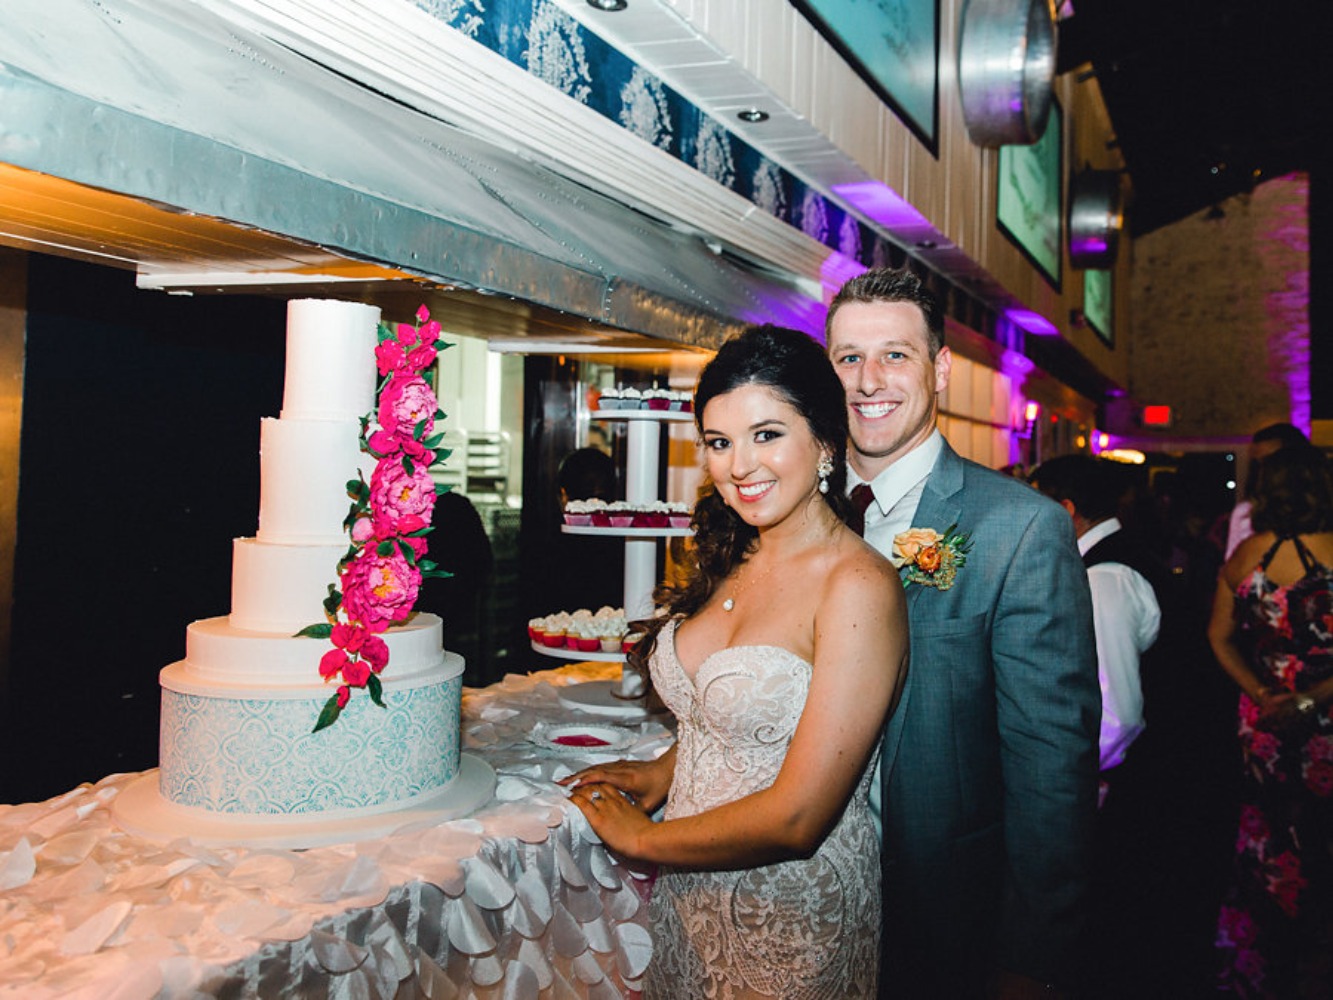 cute candid wedding couple and their wedding cake